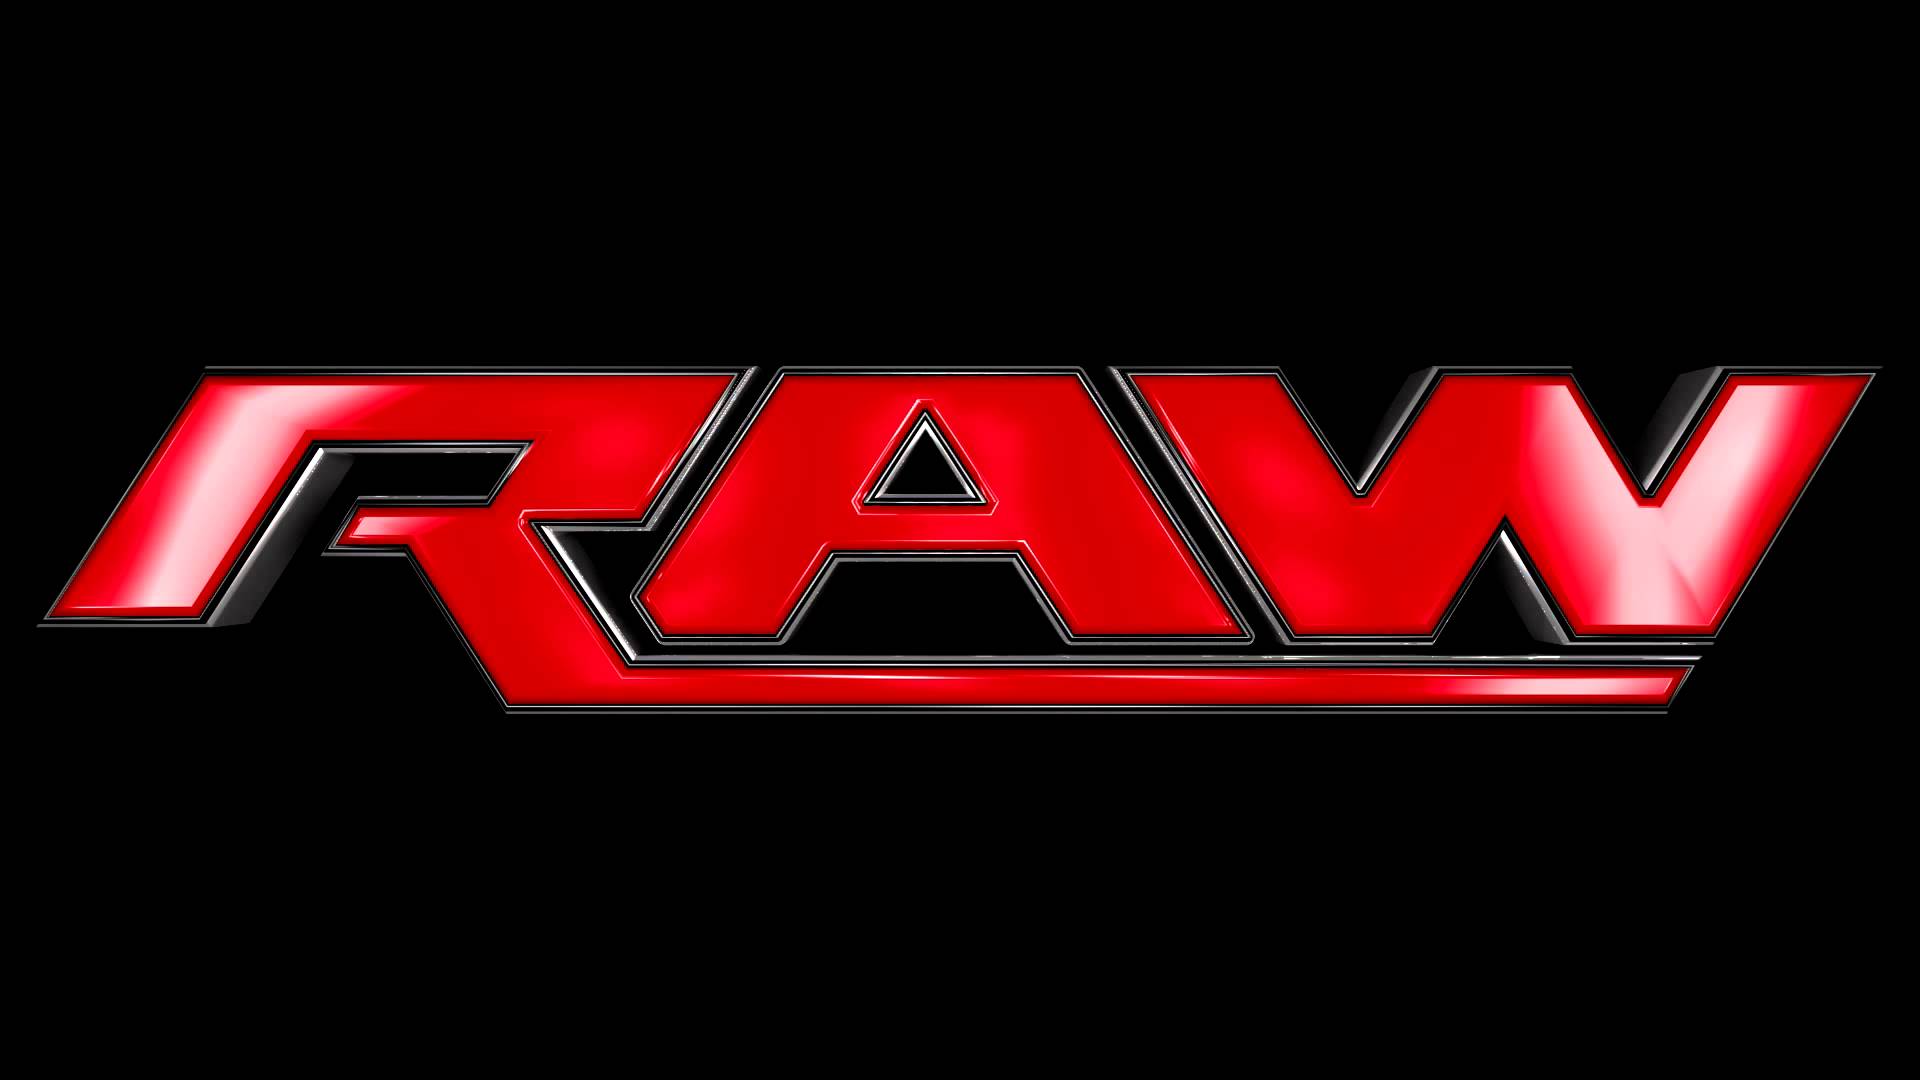 Wwe Raw Wallpaper HD Background Of Your Choice